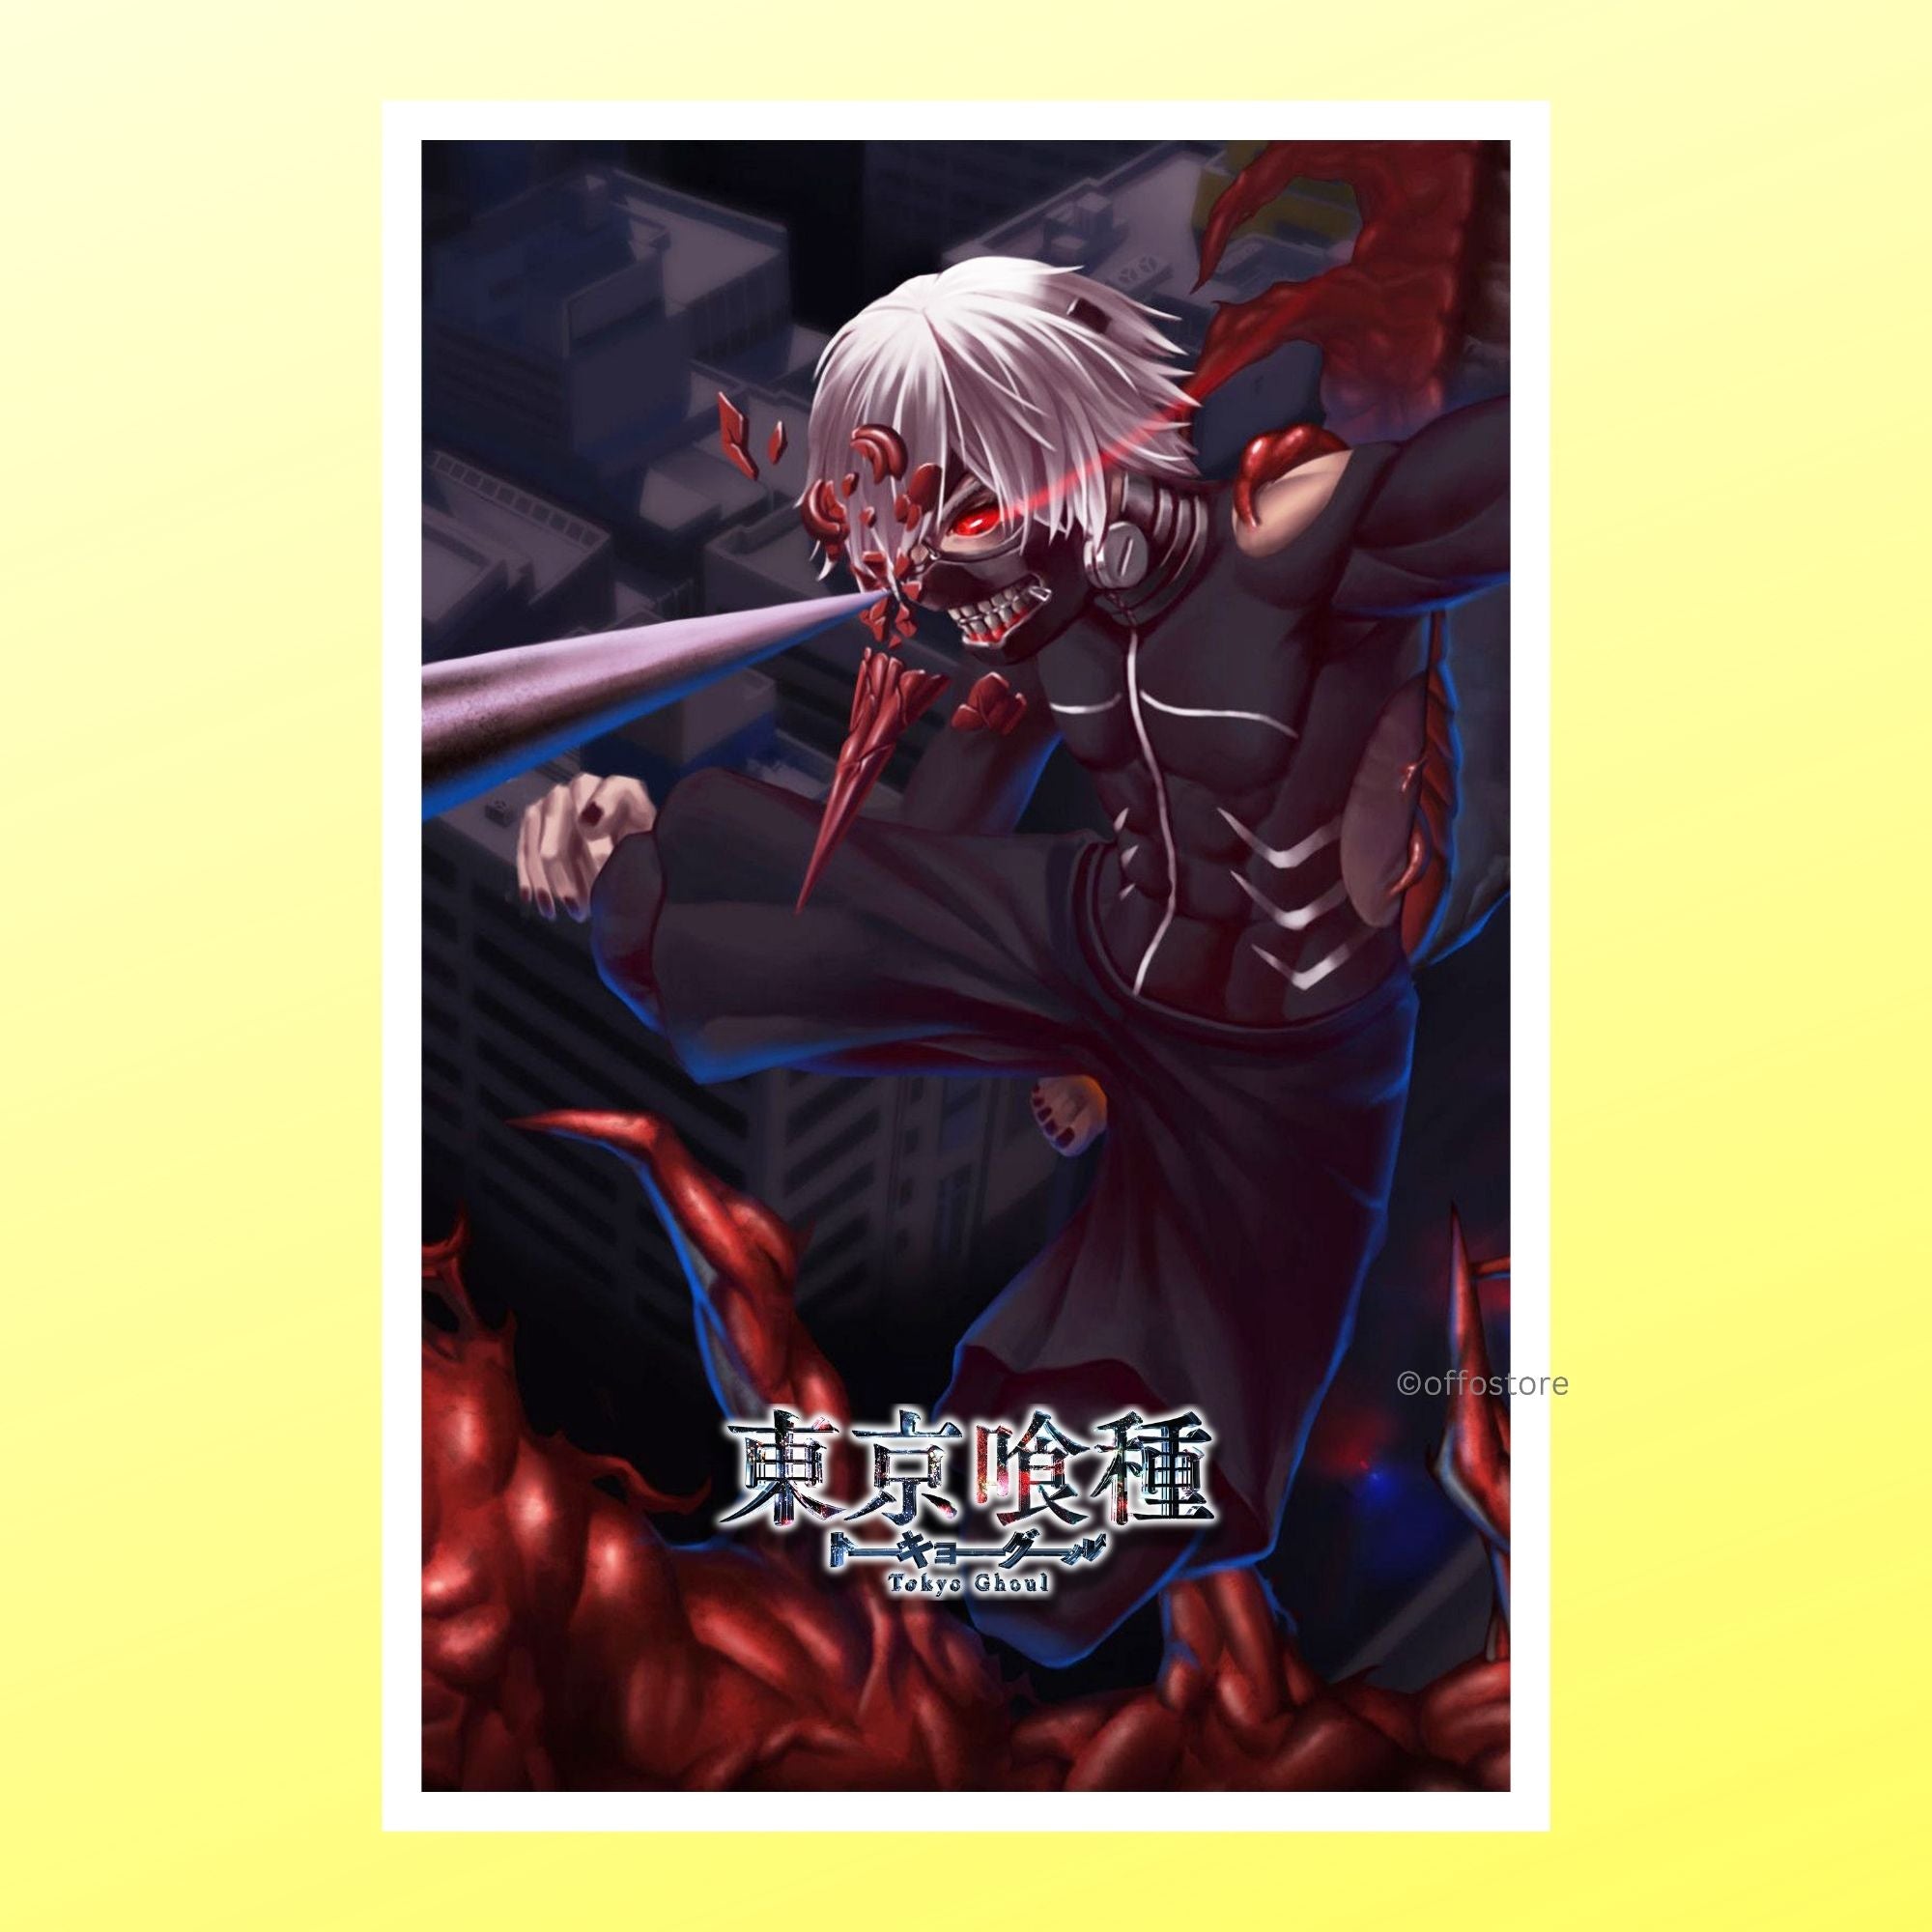 Tokyo Ghoul Anime Wall Poster